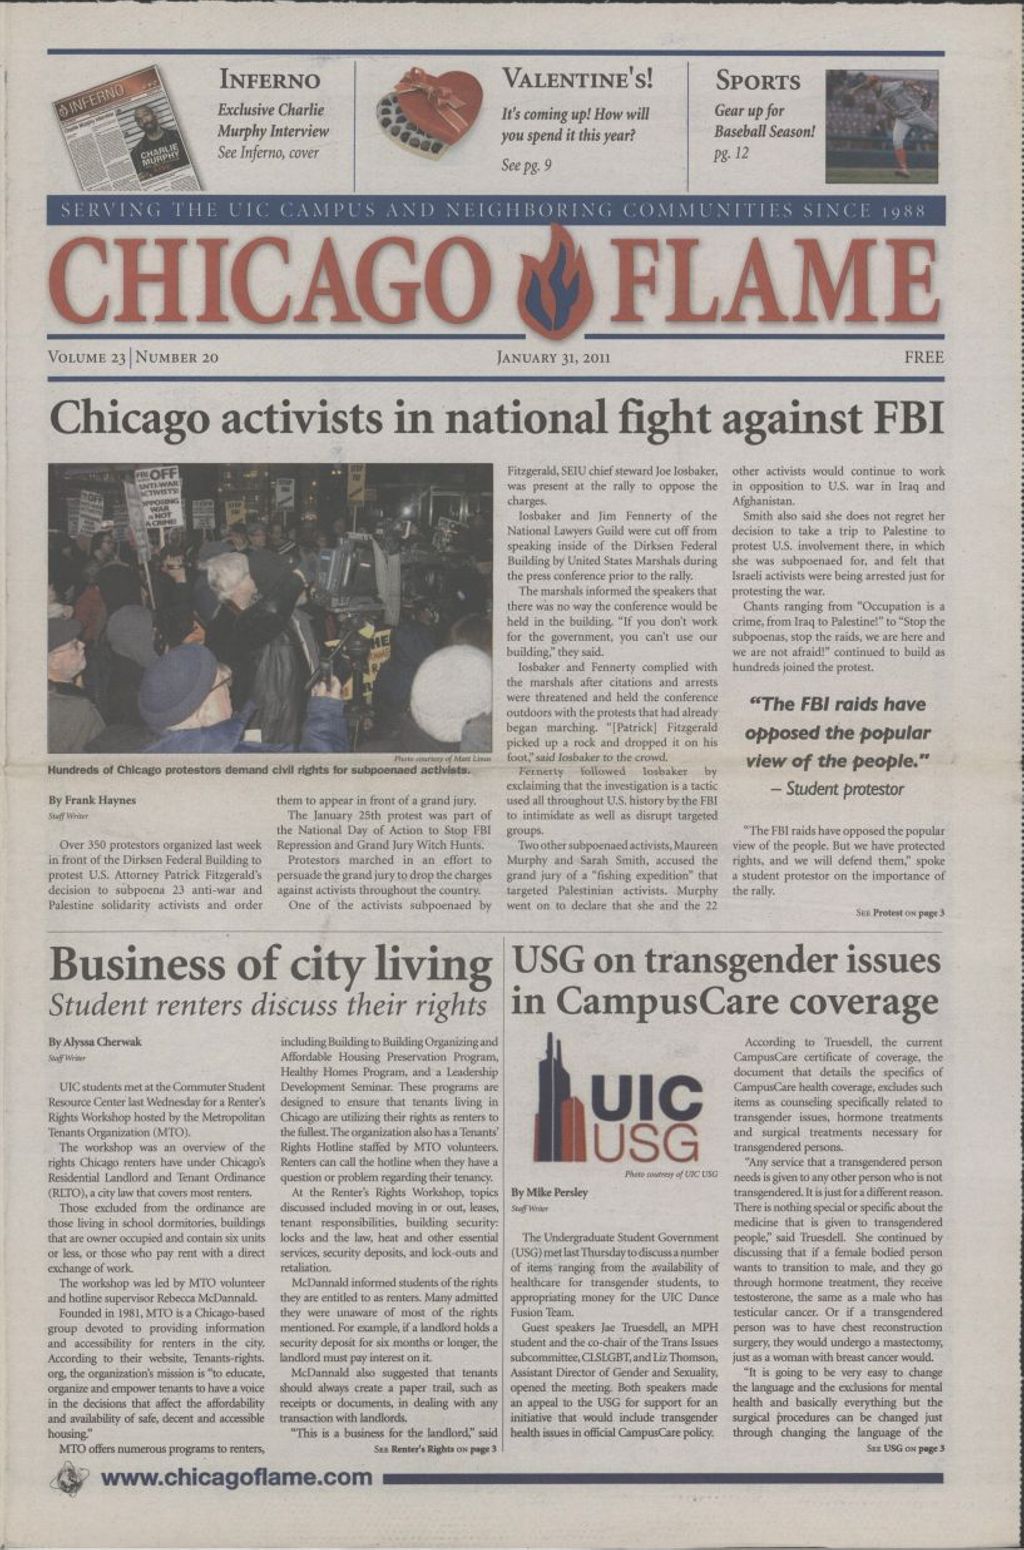 Miniature of Chicago Flame (January 31, 2011)